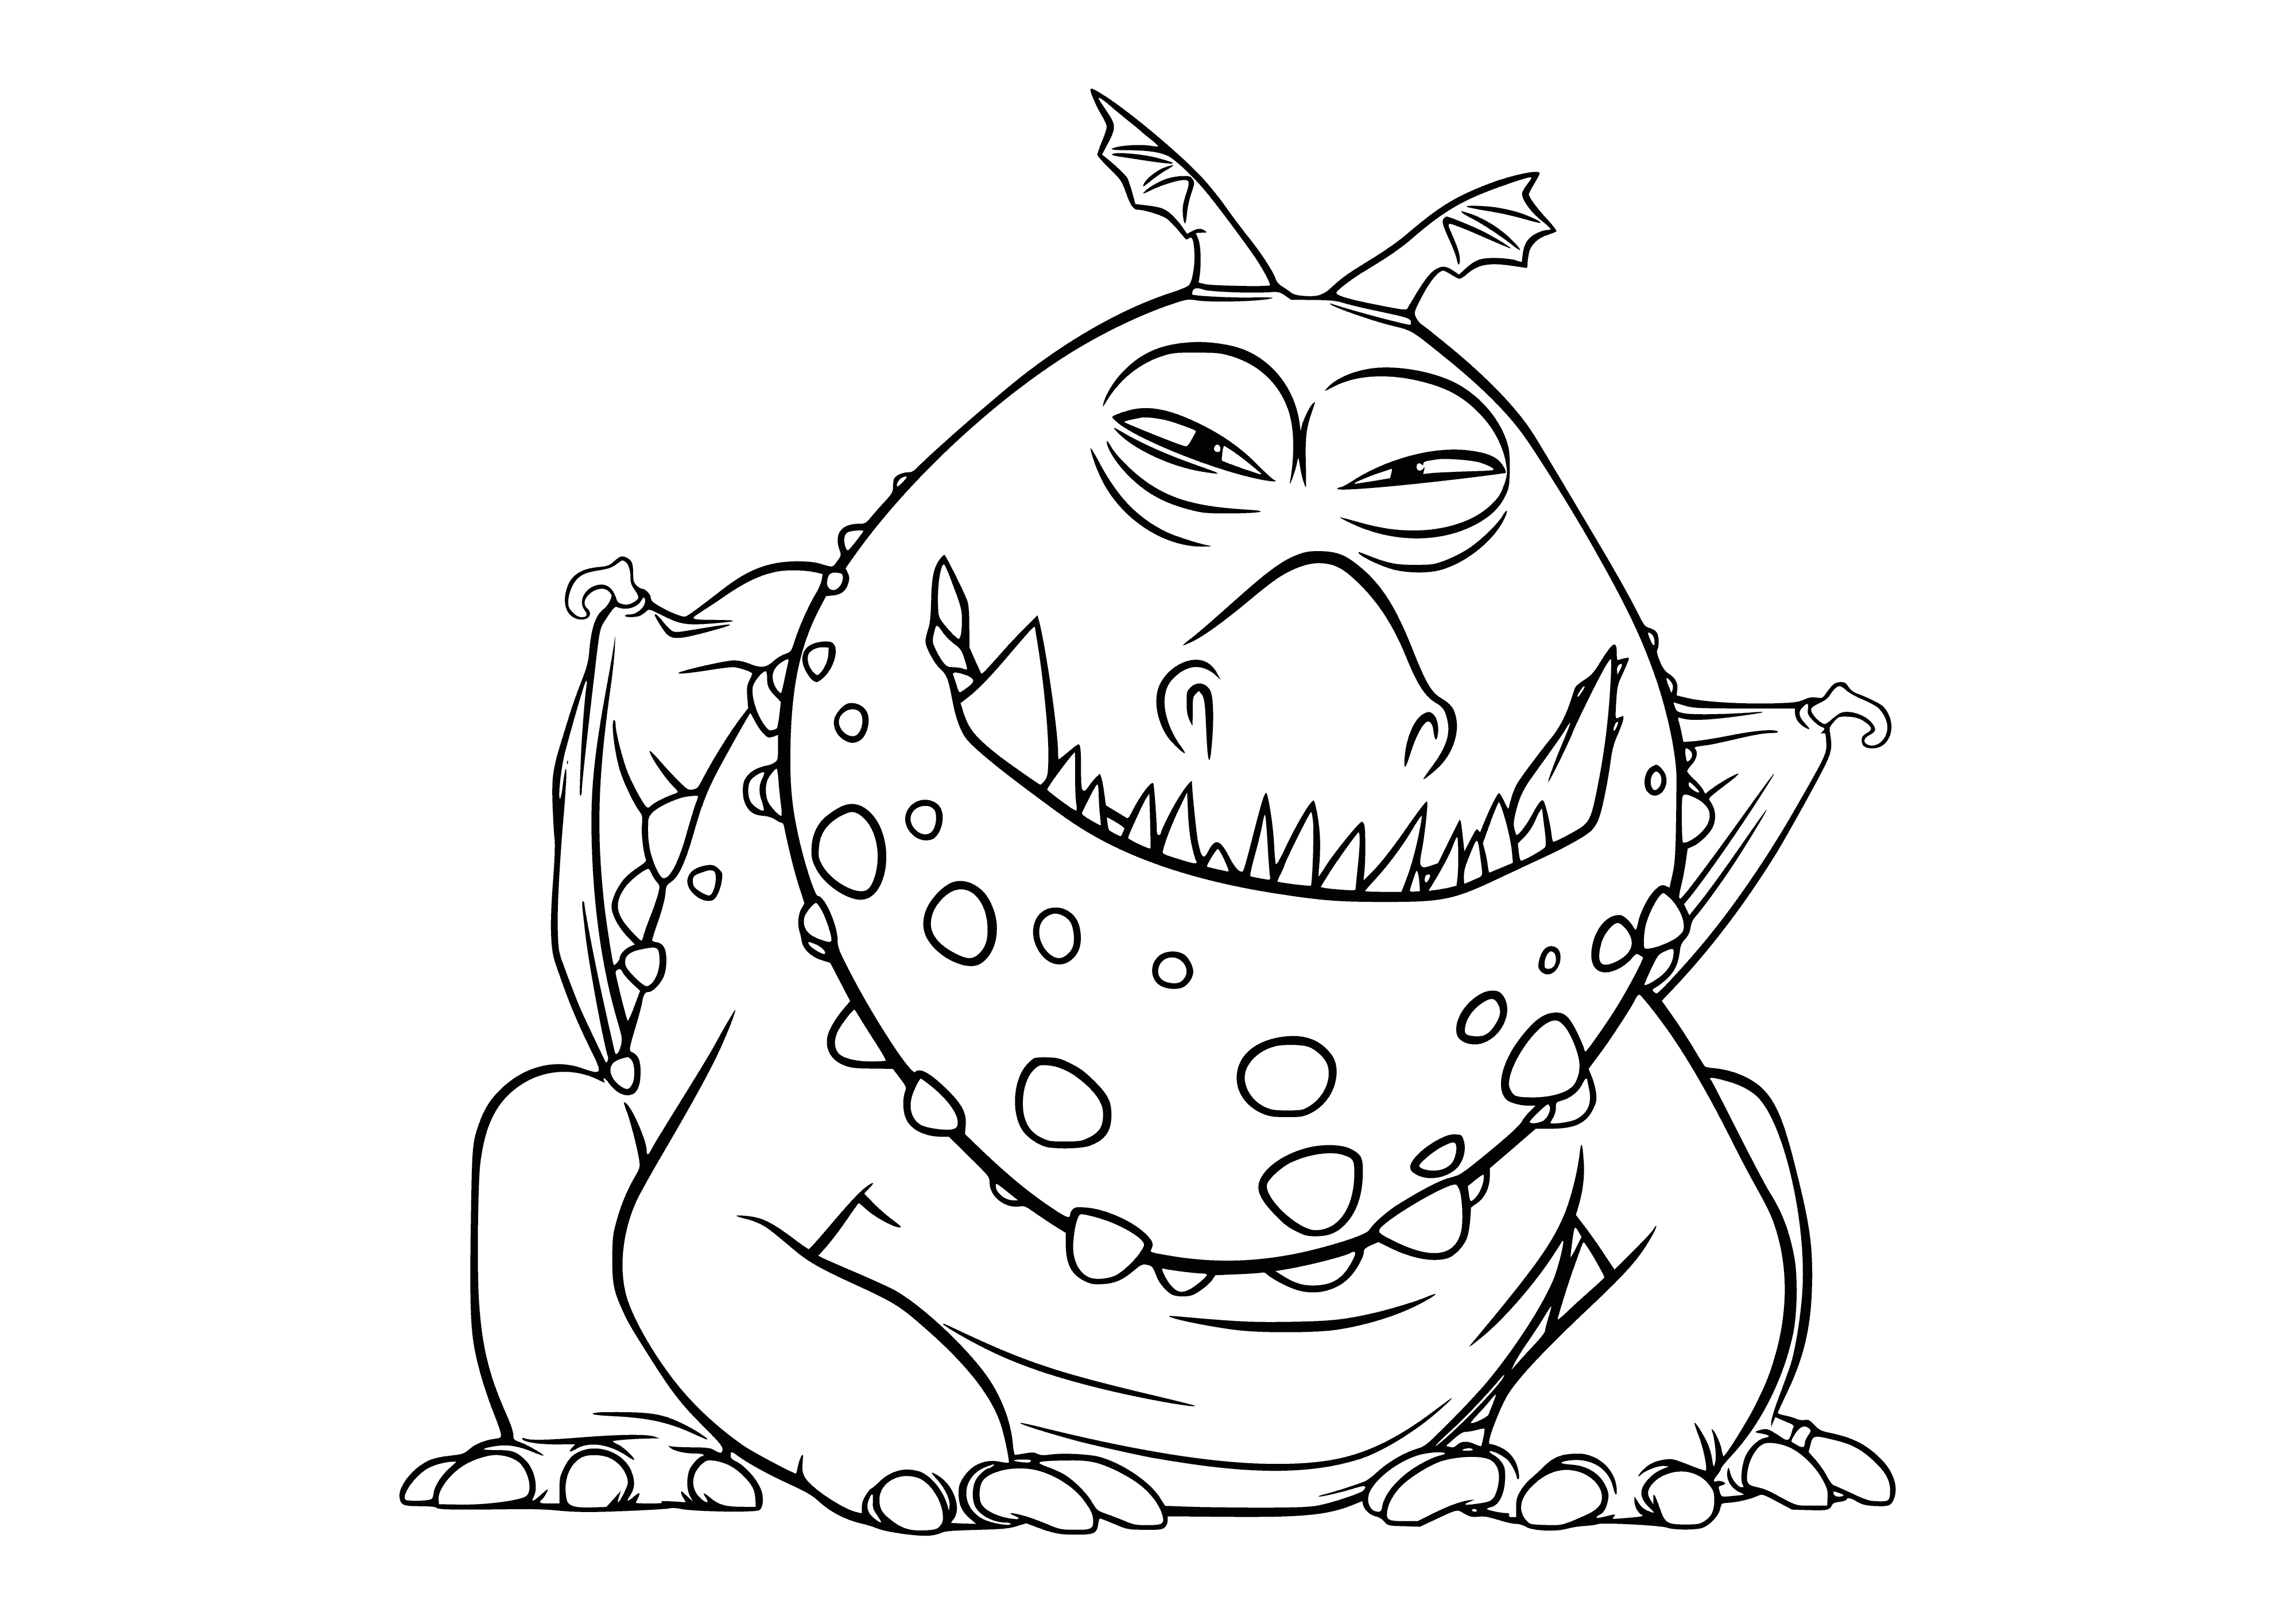 coloring page: Boy playing with charming toy dragons - bright colors, lots of fun and joy! #coloringpage #toys